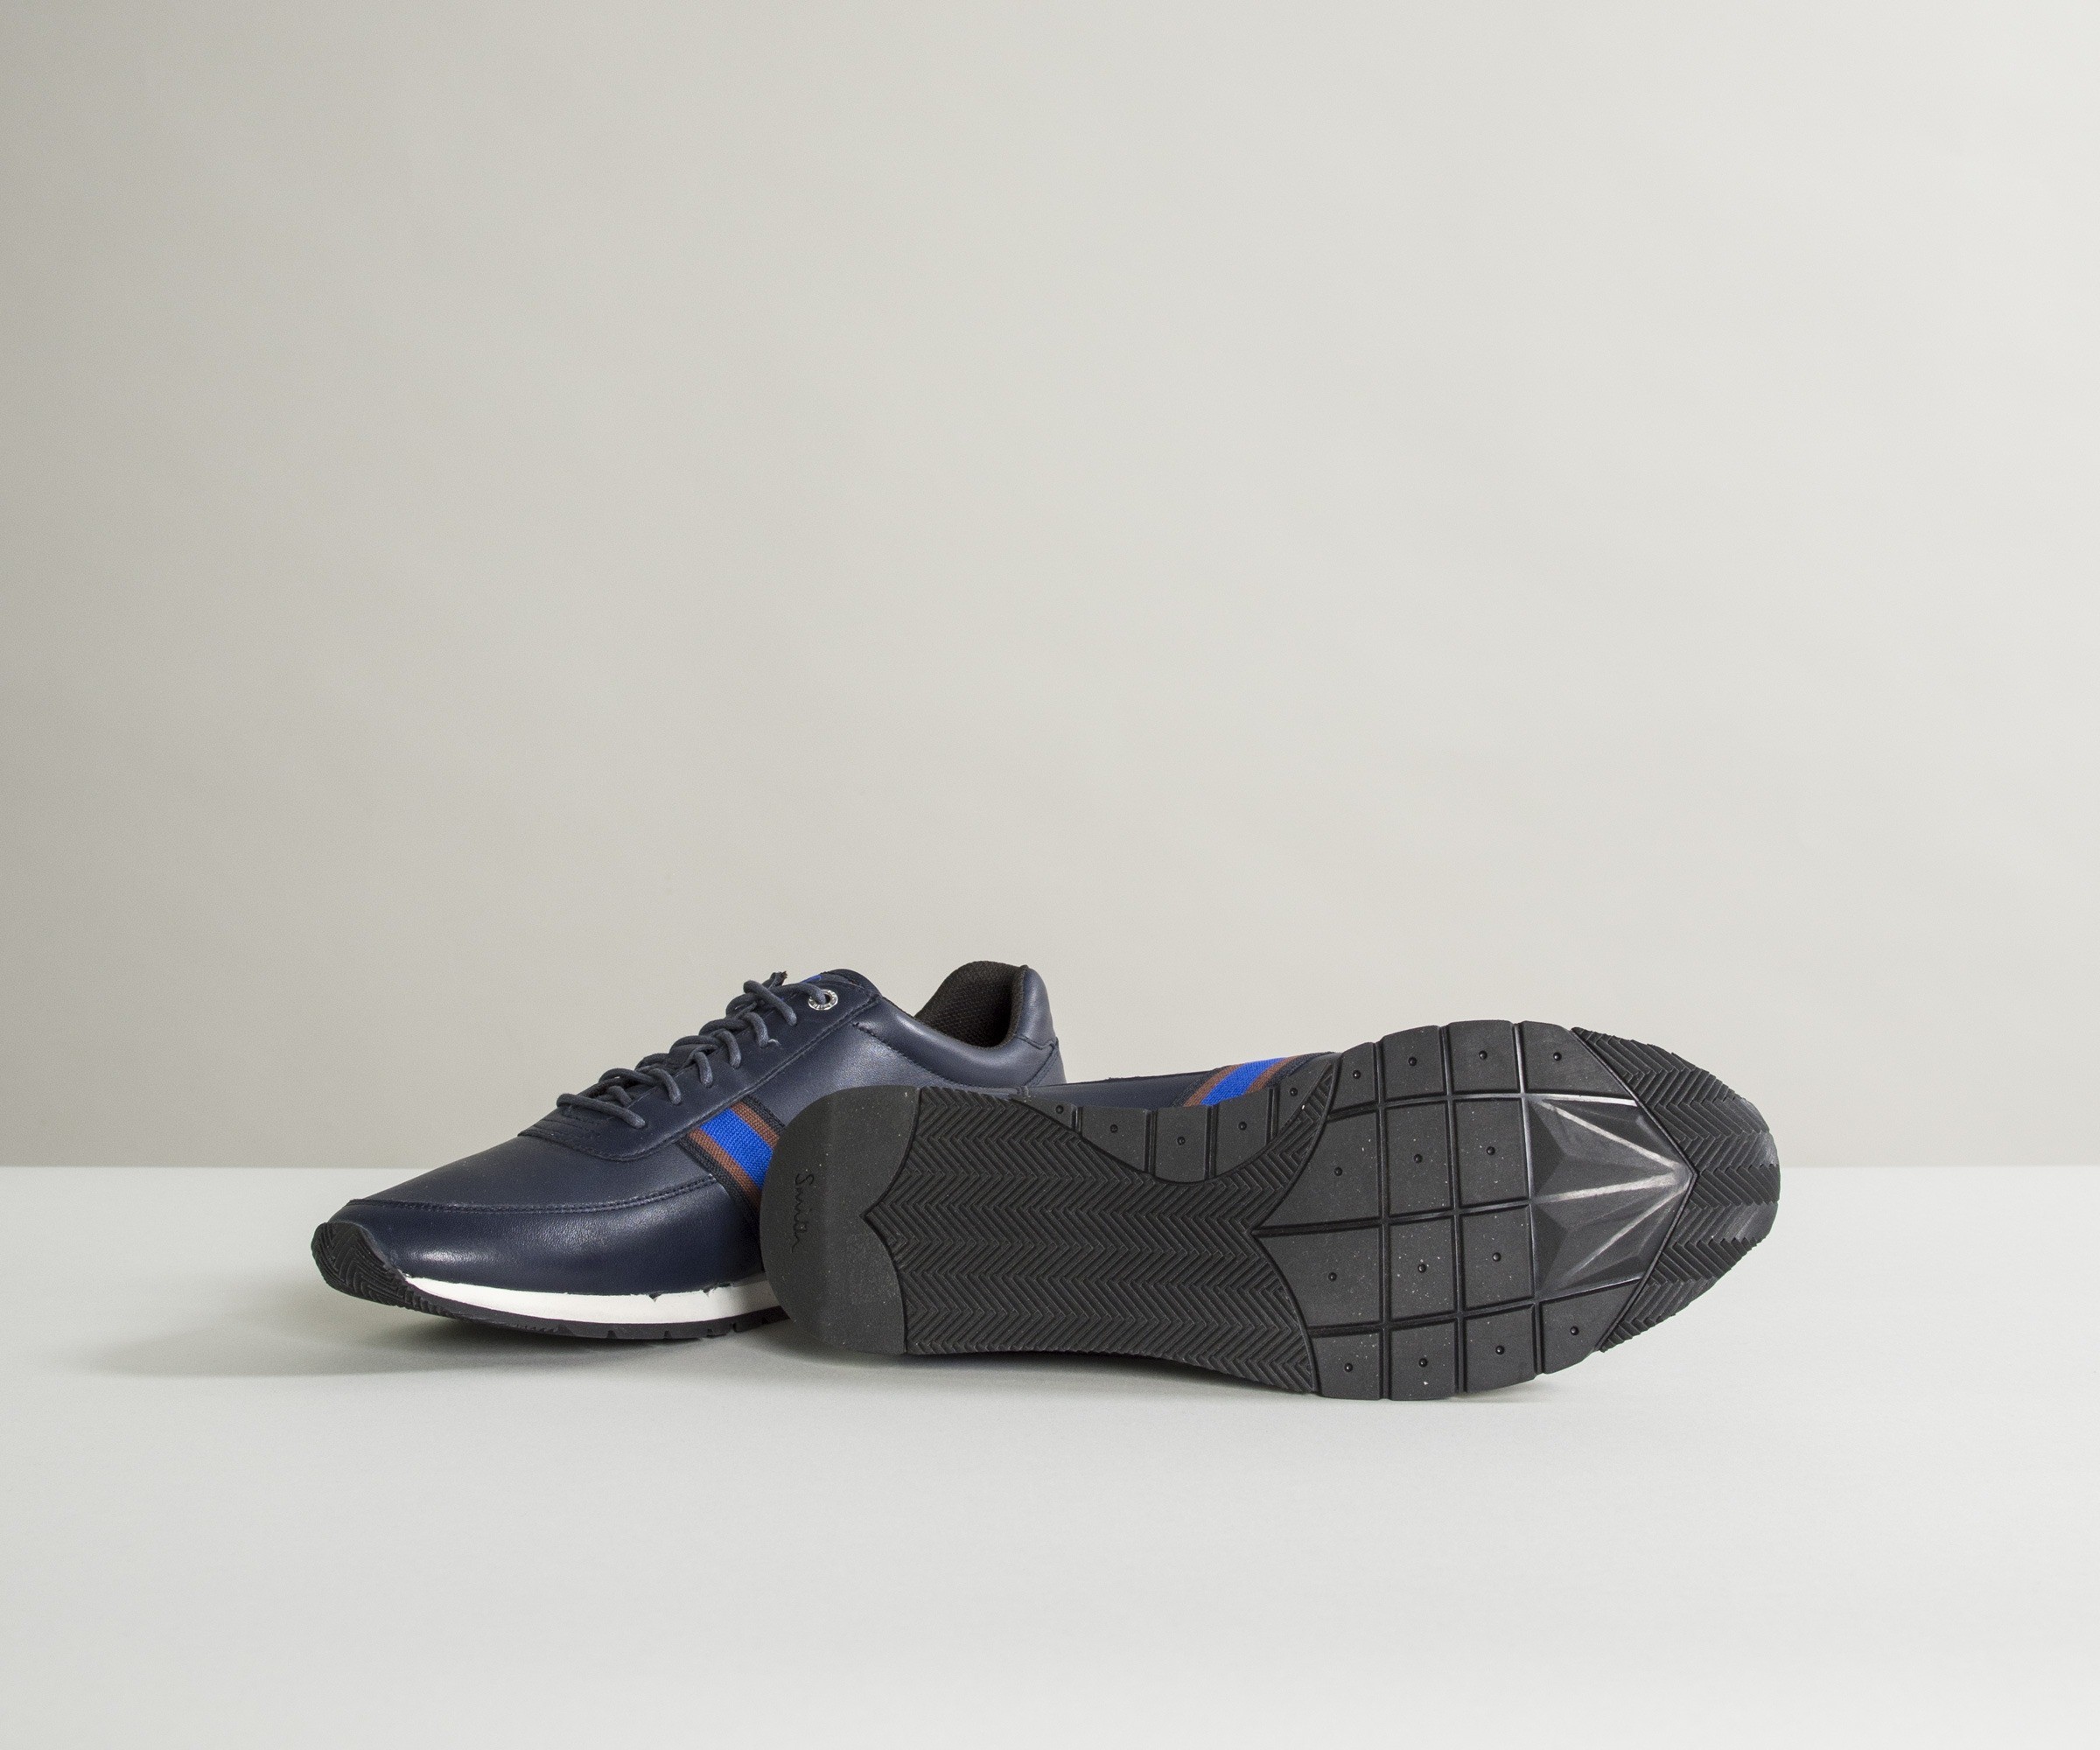 Paul Smith Shoes Swanson Galaxy Mono Leather Running Trainer Navy